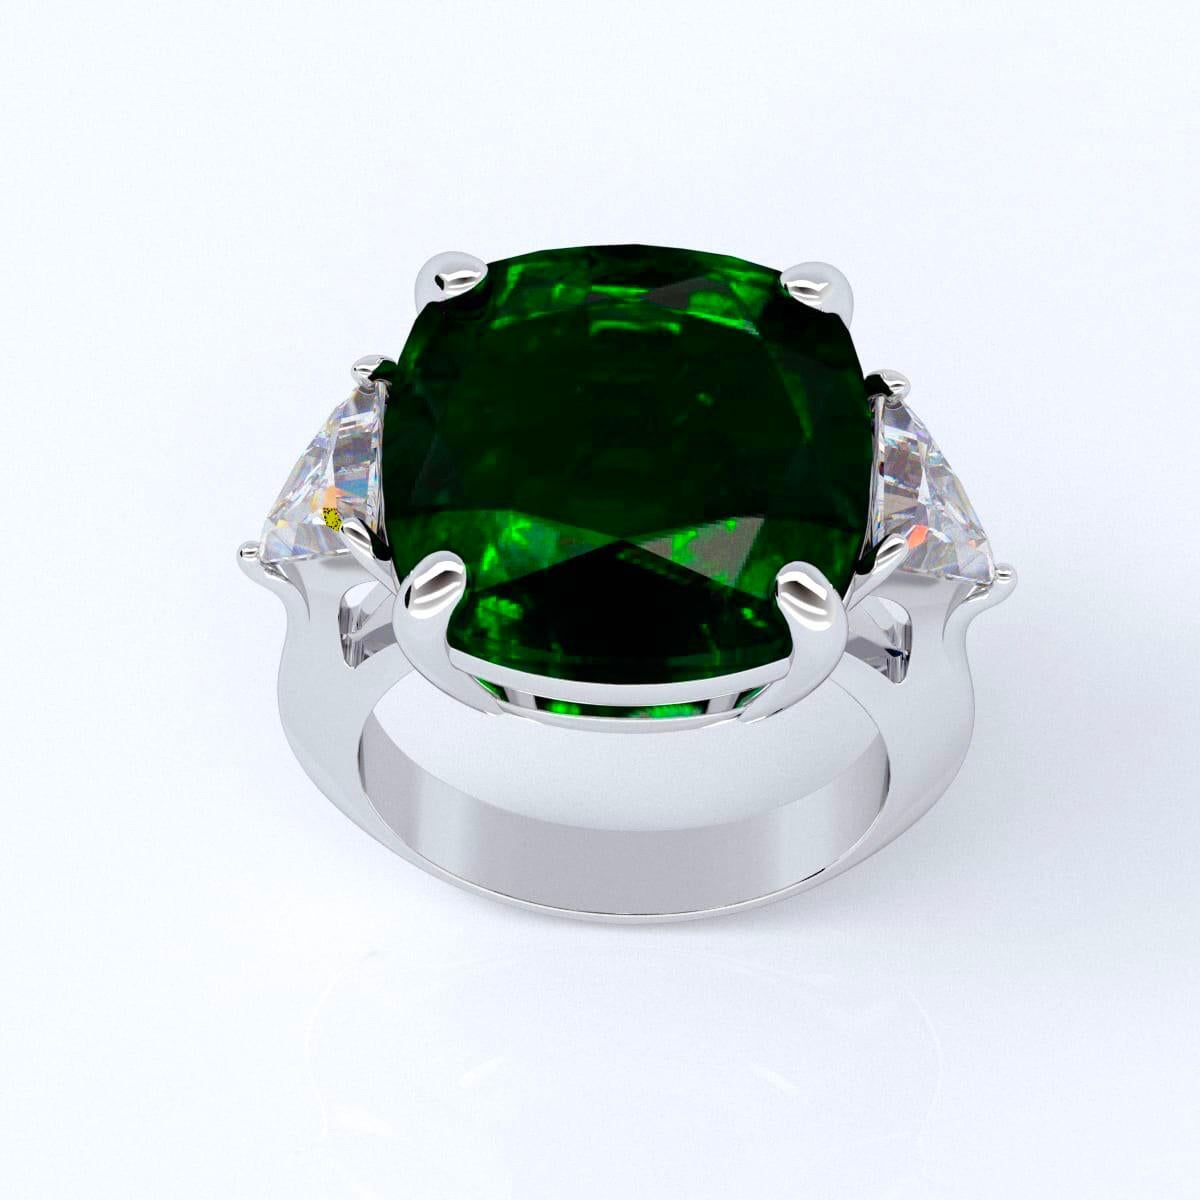 From Emilio Jewelry, a well known and respected wholesaler/dealer located on New York’s iconic Fifth Avenue,
The focal point of this ring is the perfectly cut square cushion emerald, a very hard stone to come across in this shape and size! The